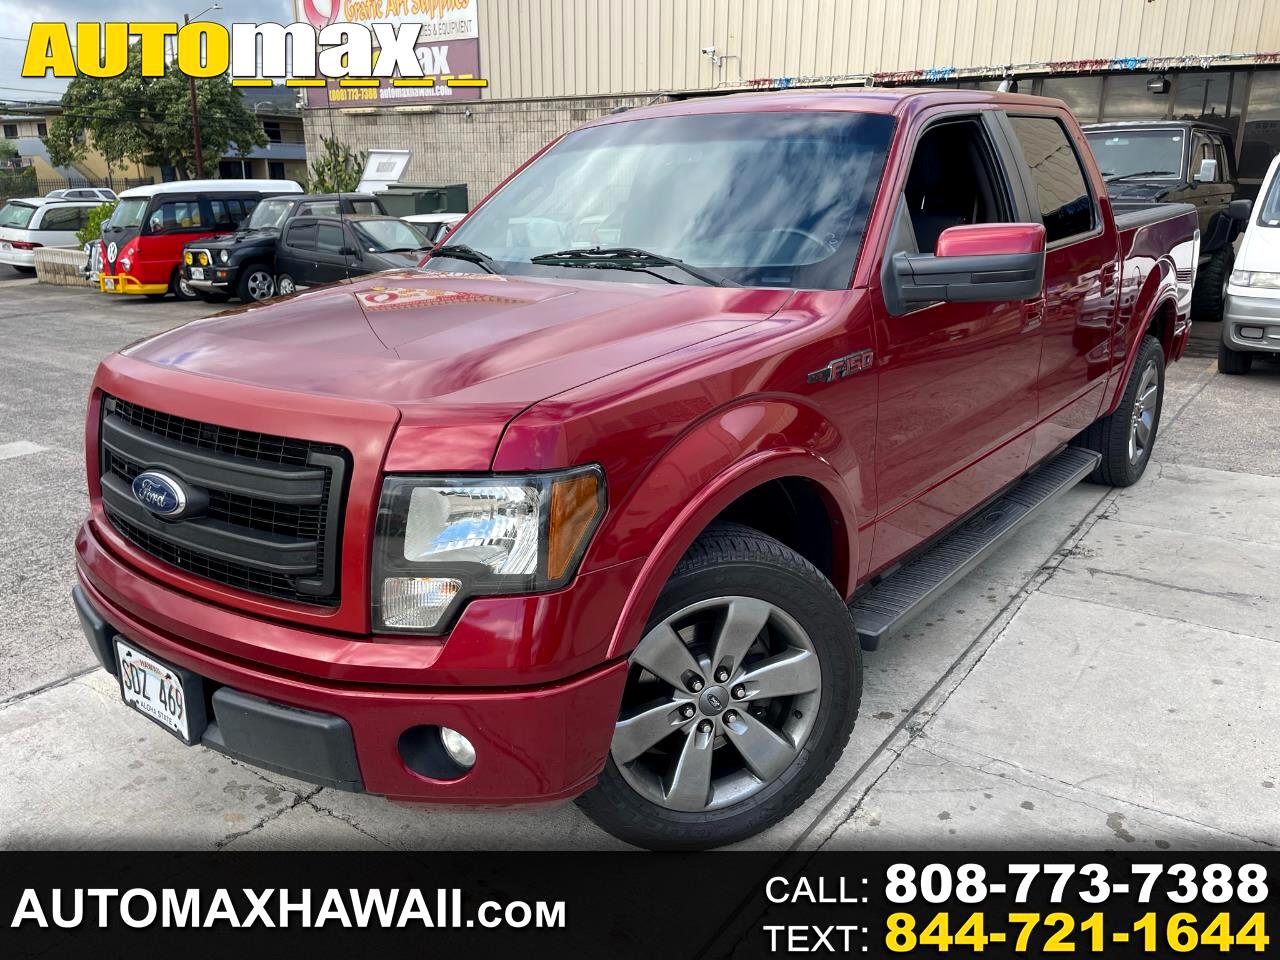 2014 Ford F-150 FX2 SuperCrew 5.5-ft. Bed 2WD